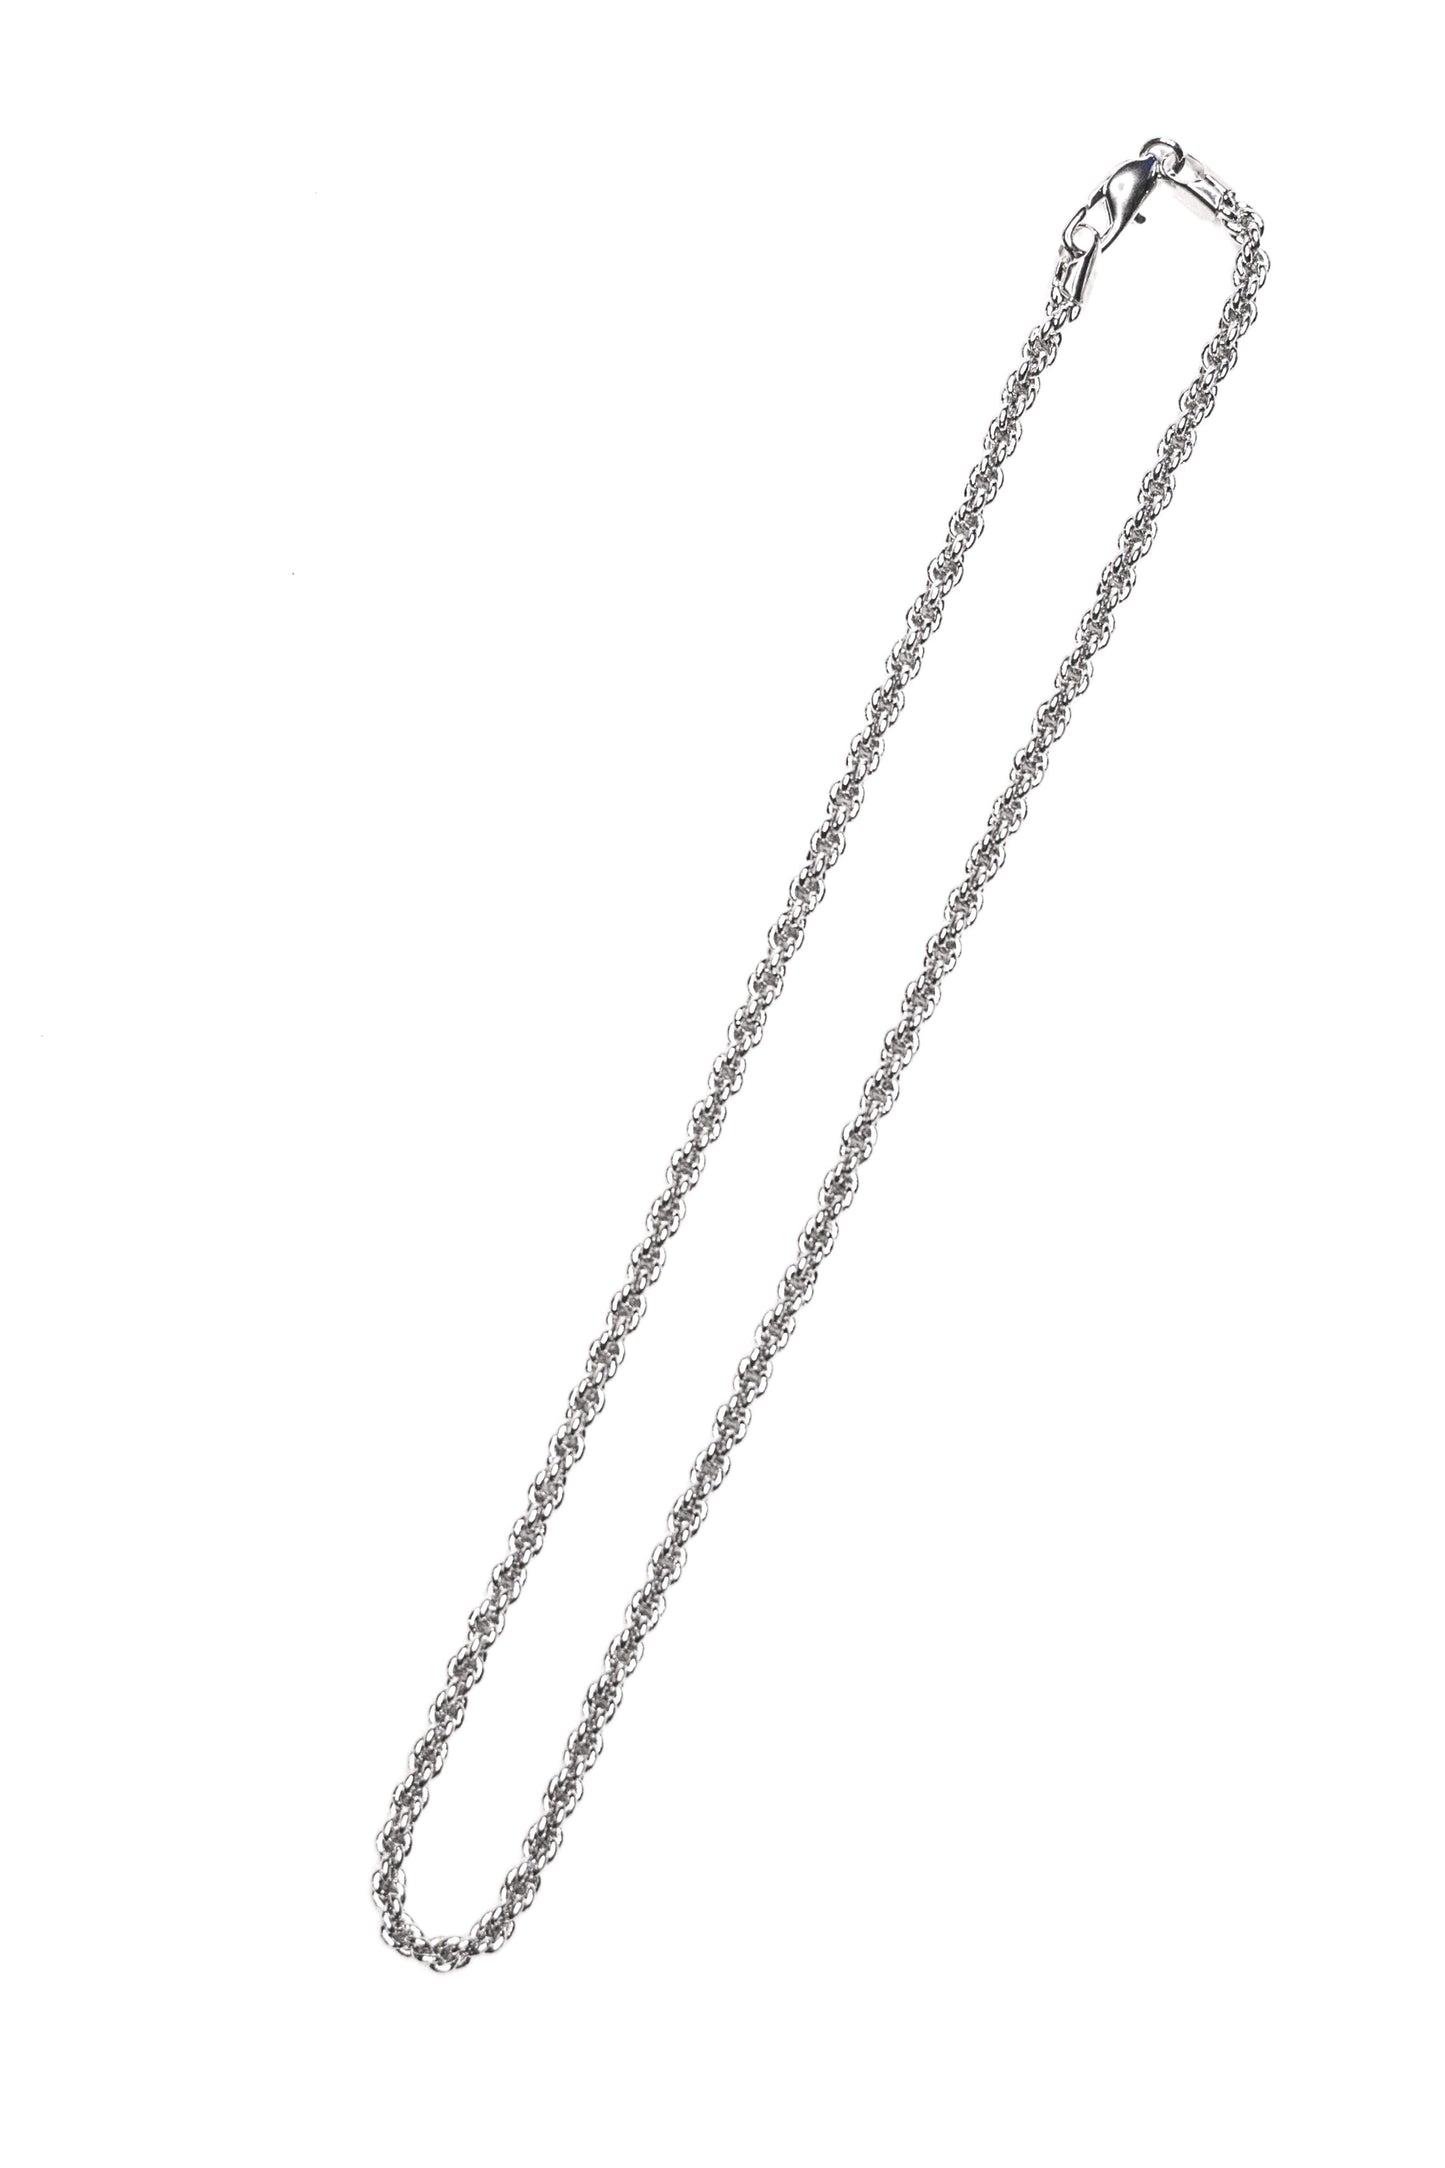 Stainless Steel Rope Necklaces - 18 20 24 26 30 Inches - Extra Chain Jewelry